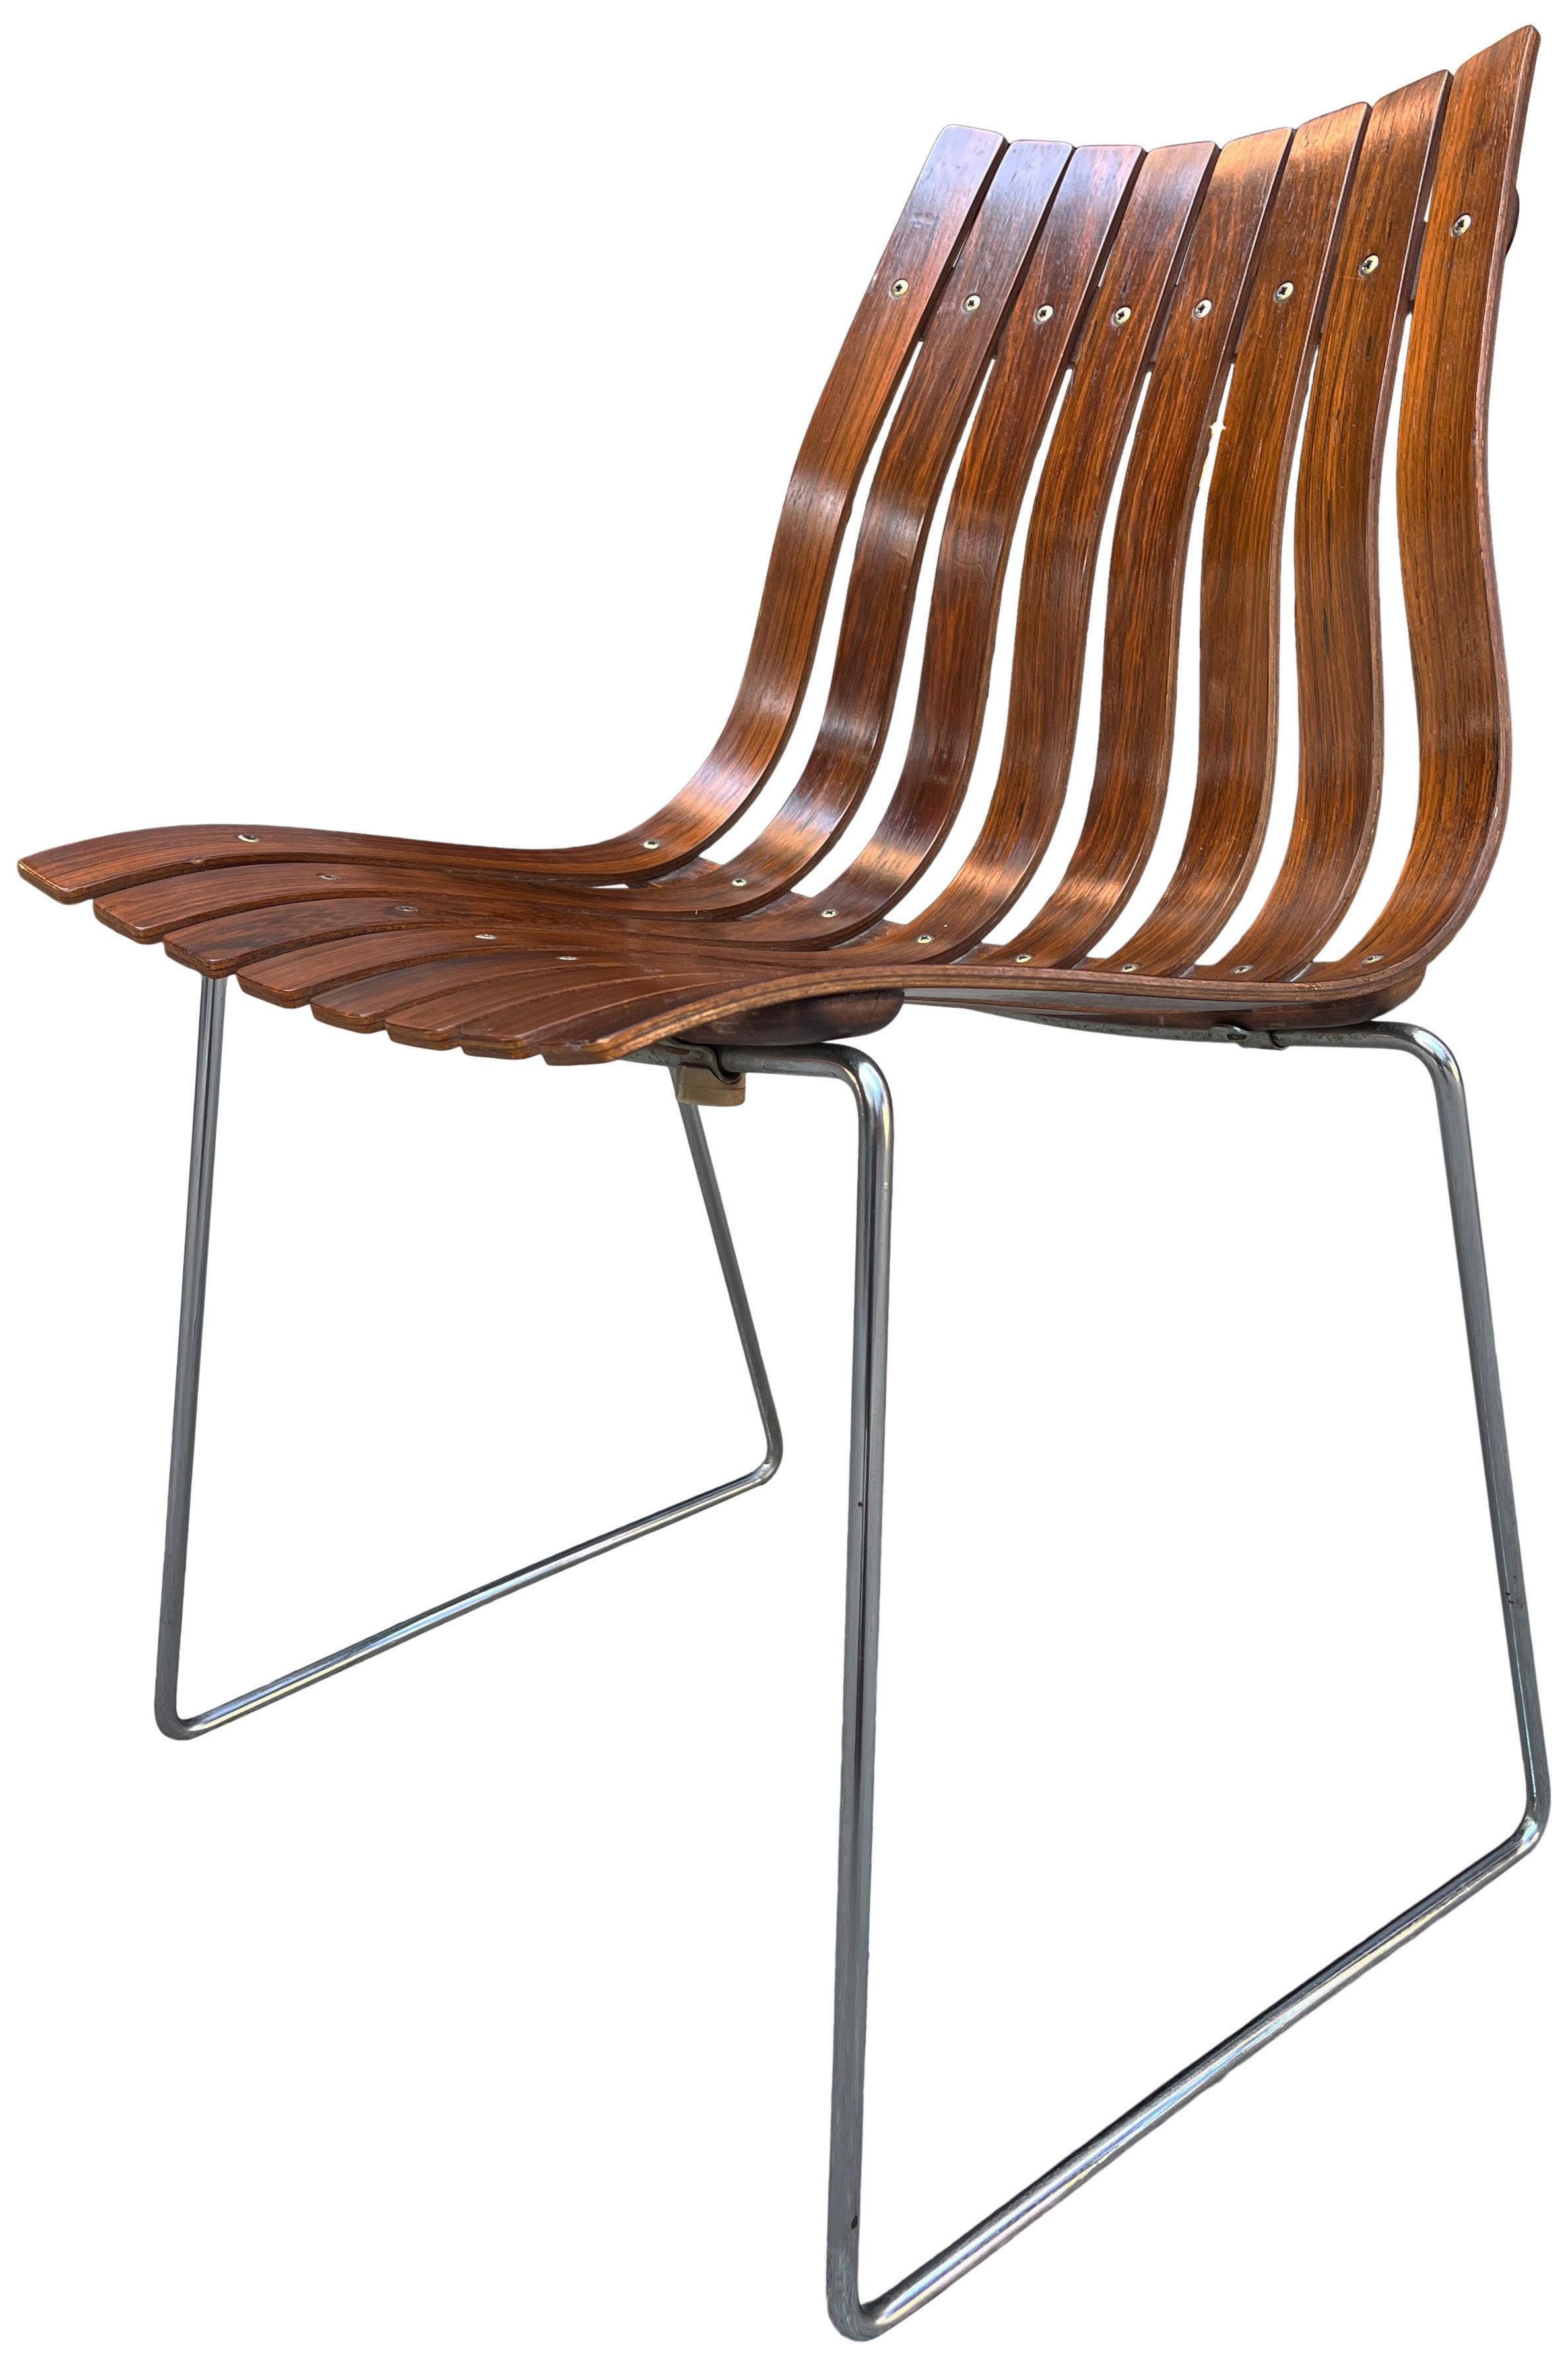 Chrome Midcentury Scandia Chairs by Hans Brattrud for Hove Mobler For Sale